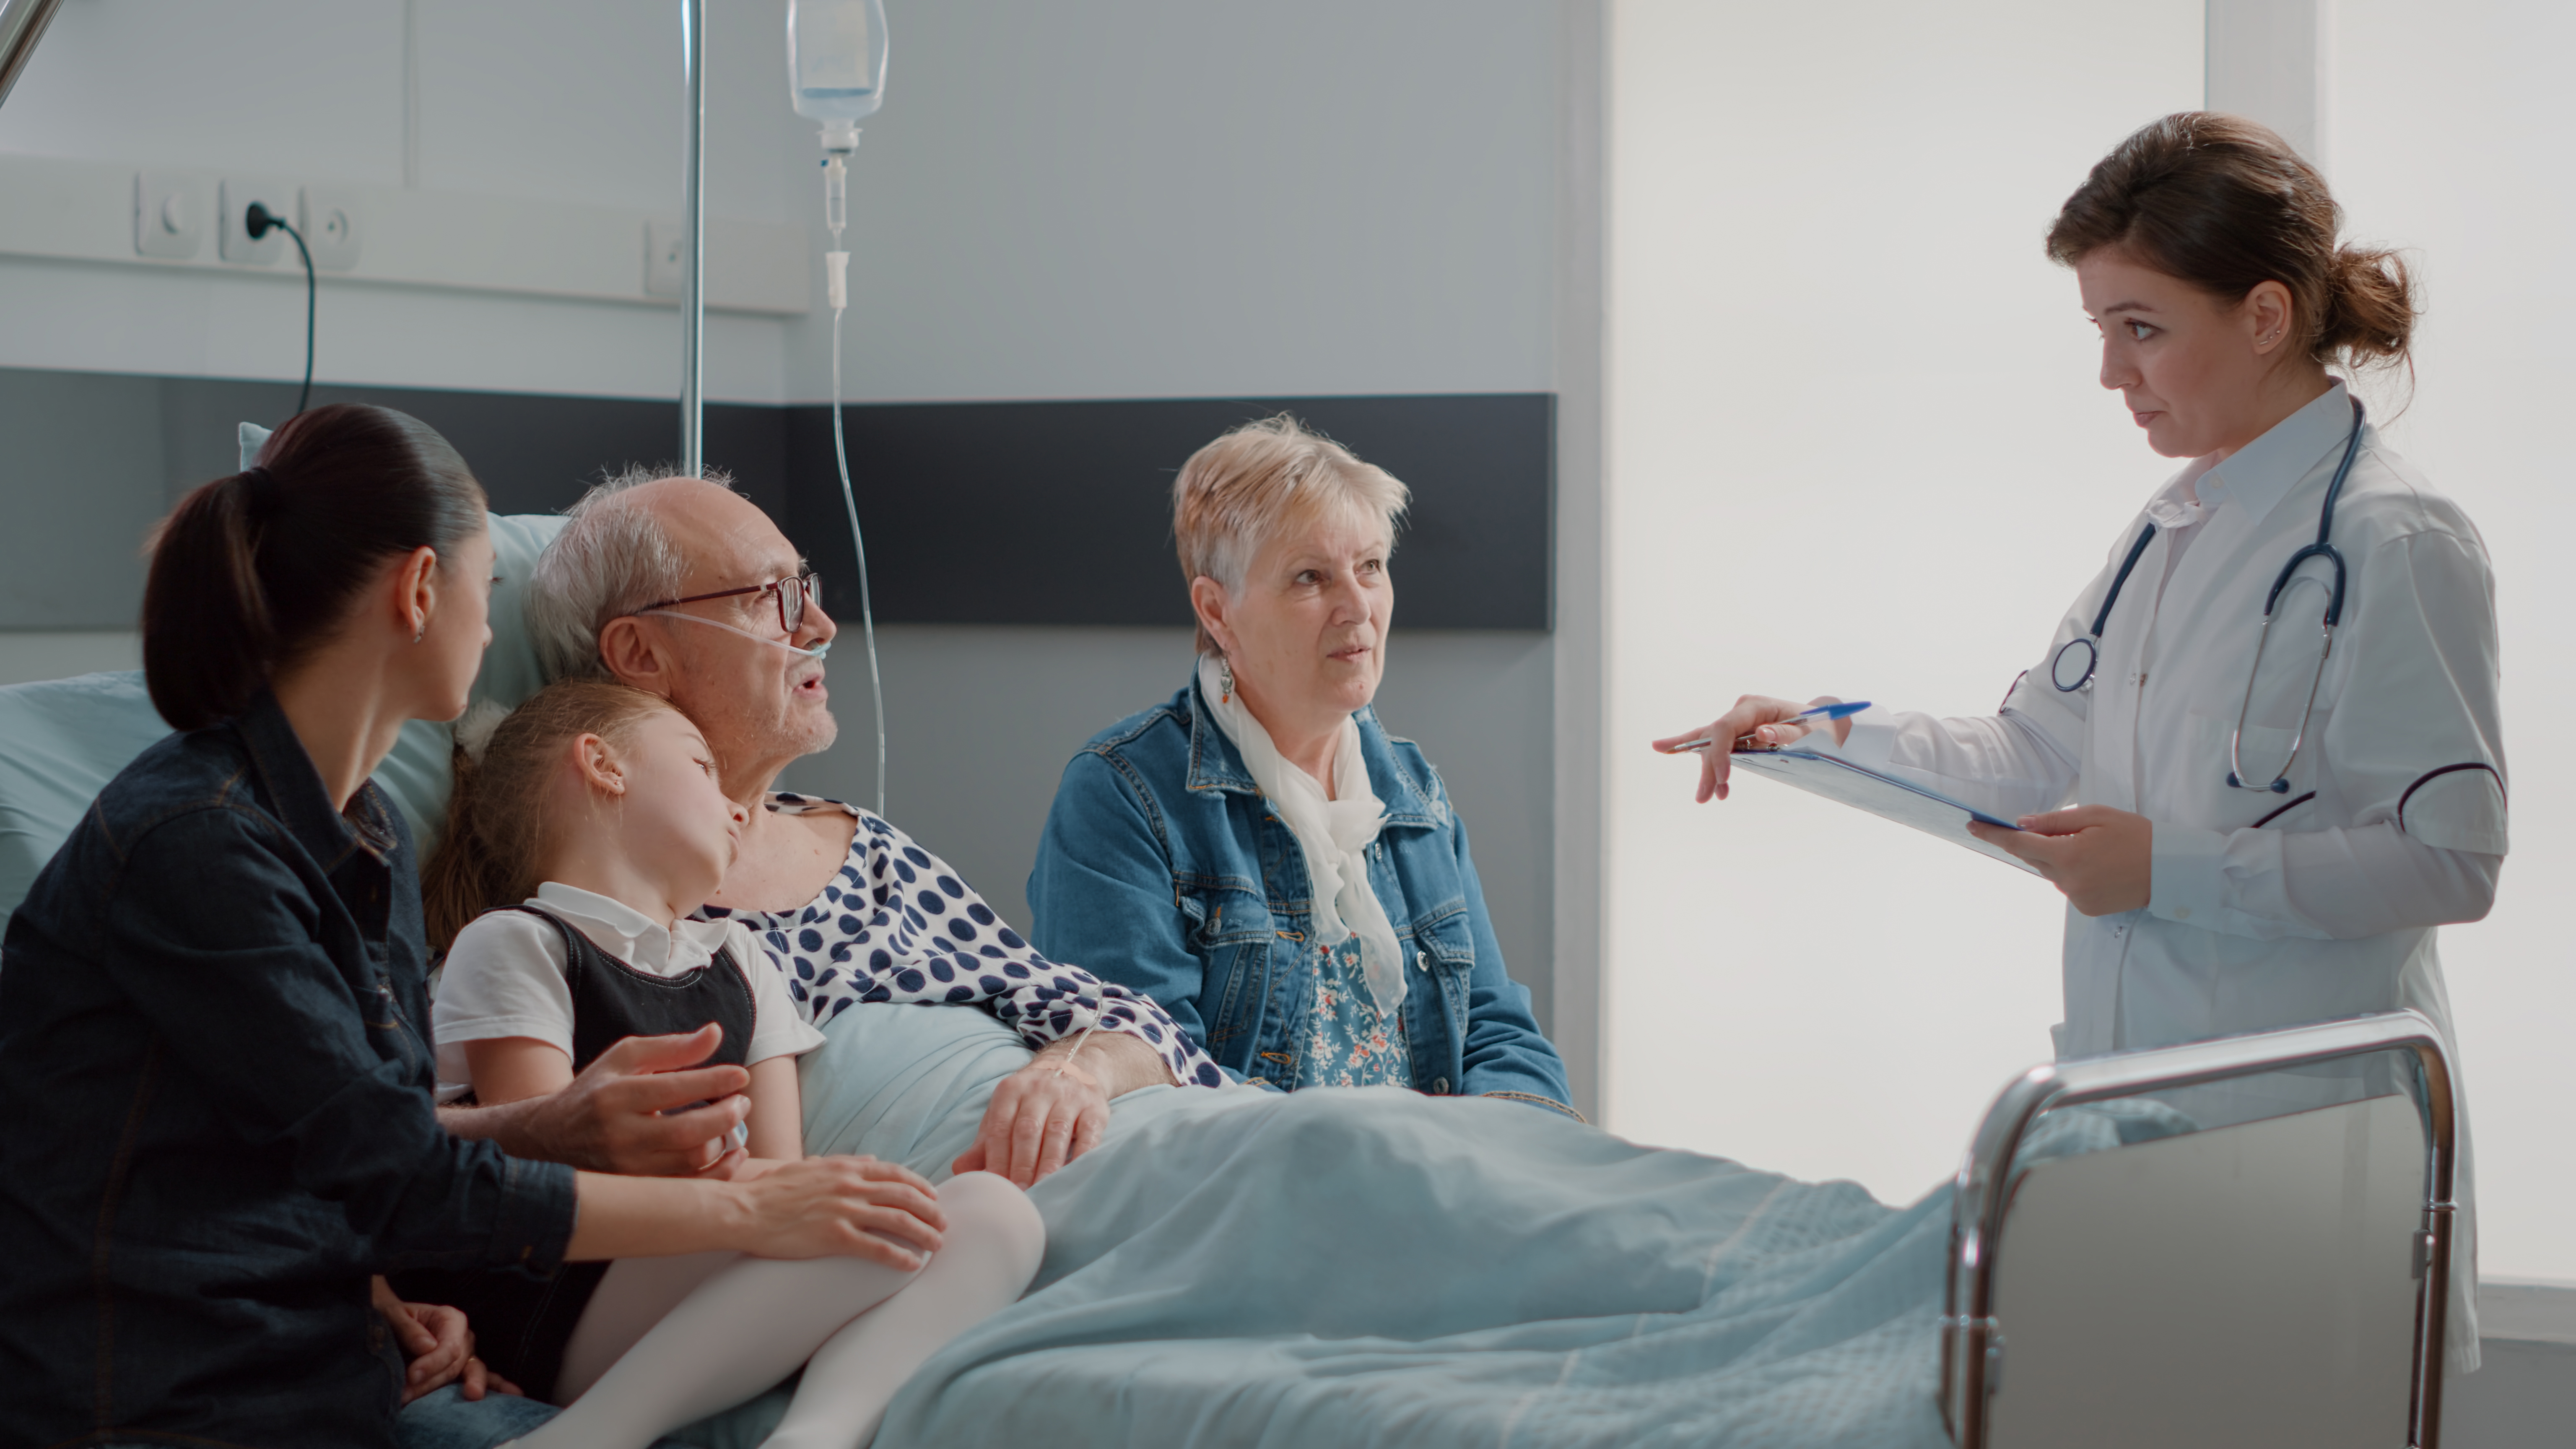 An elderly man in a hospital bed, with an adult and child sitting on one side and an elderly woman sitting on the other side, while a doctor stands at the foot of the bed with a clipboard